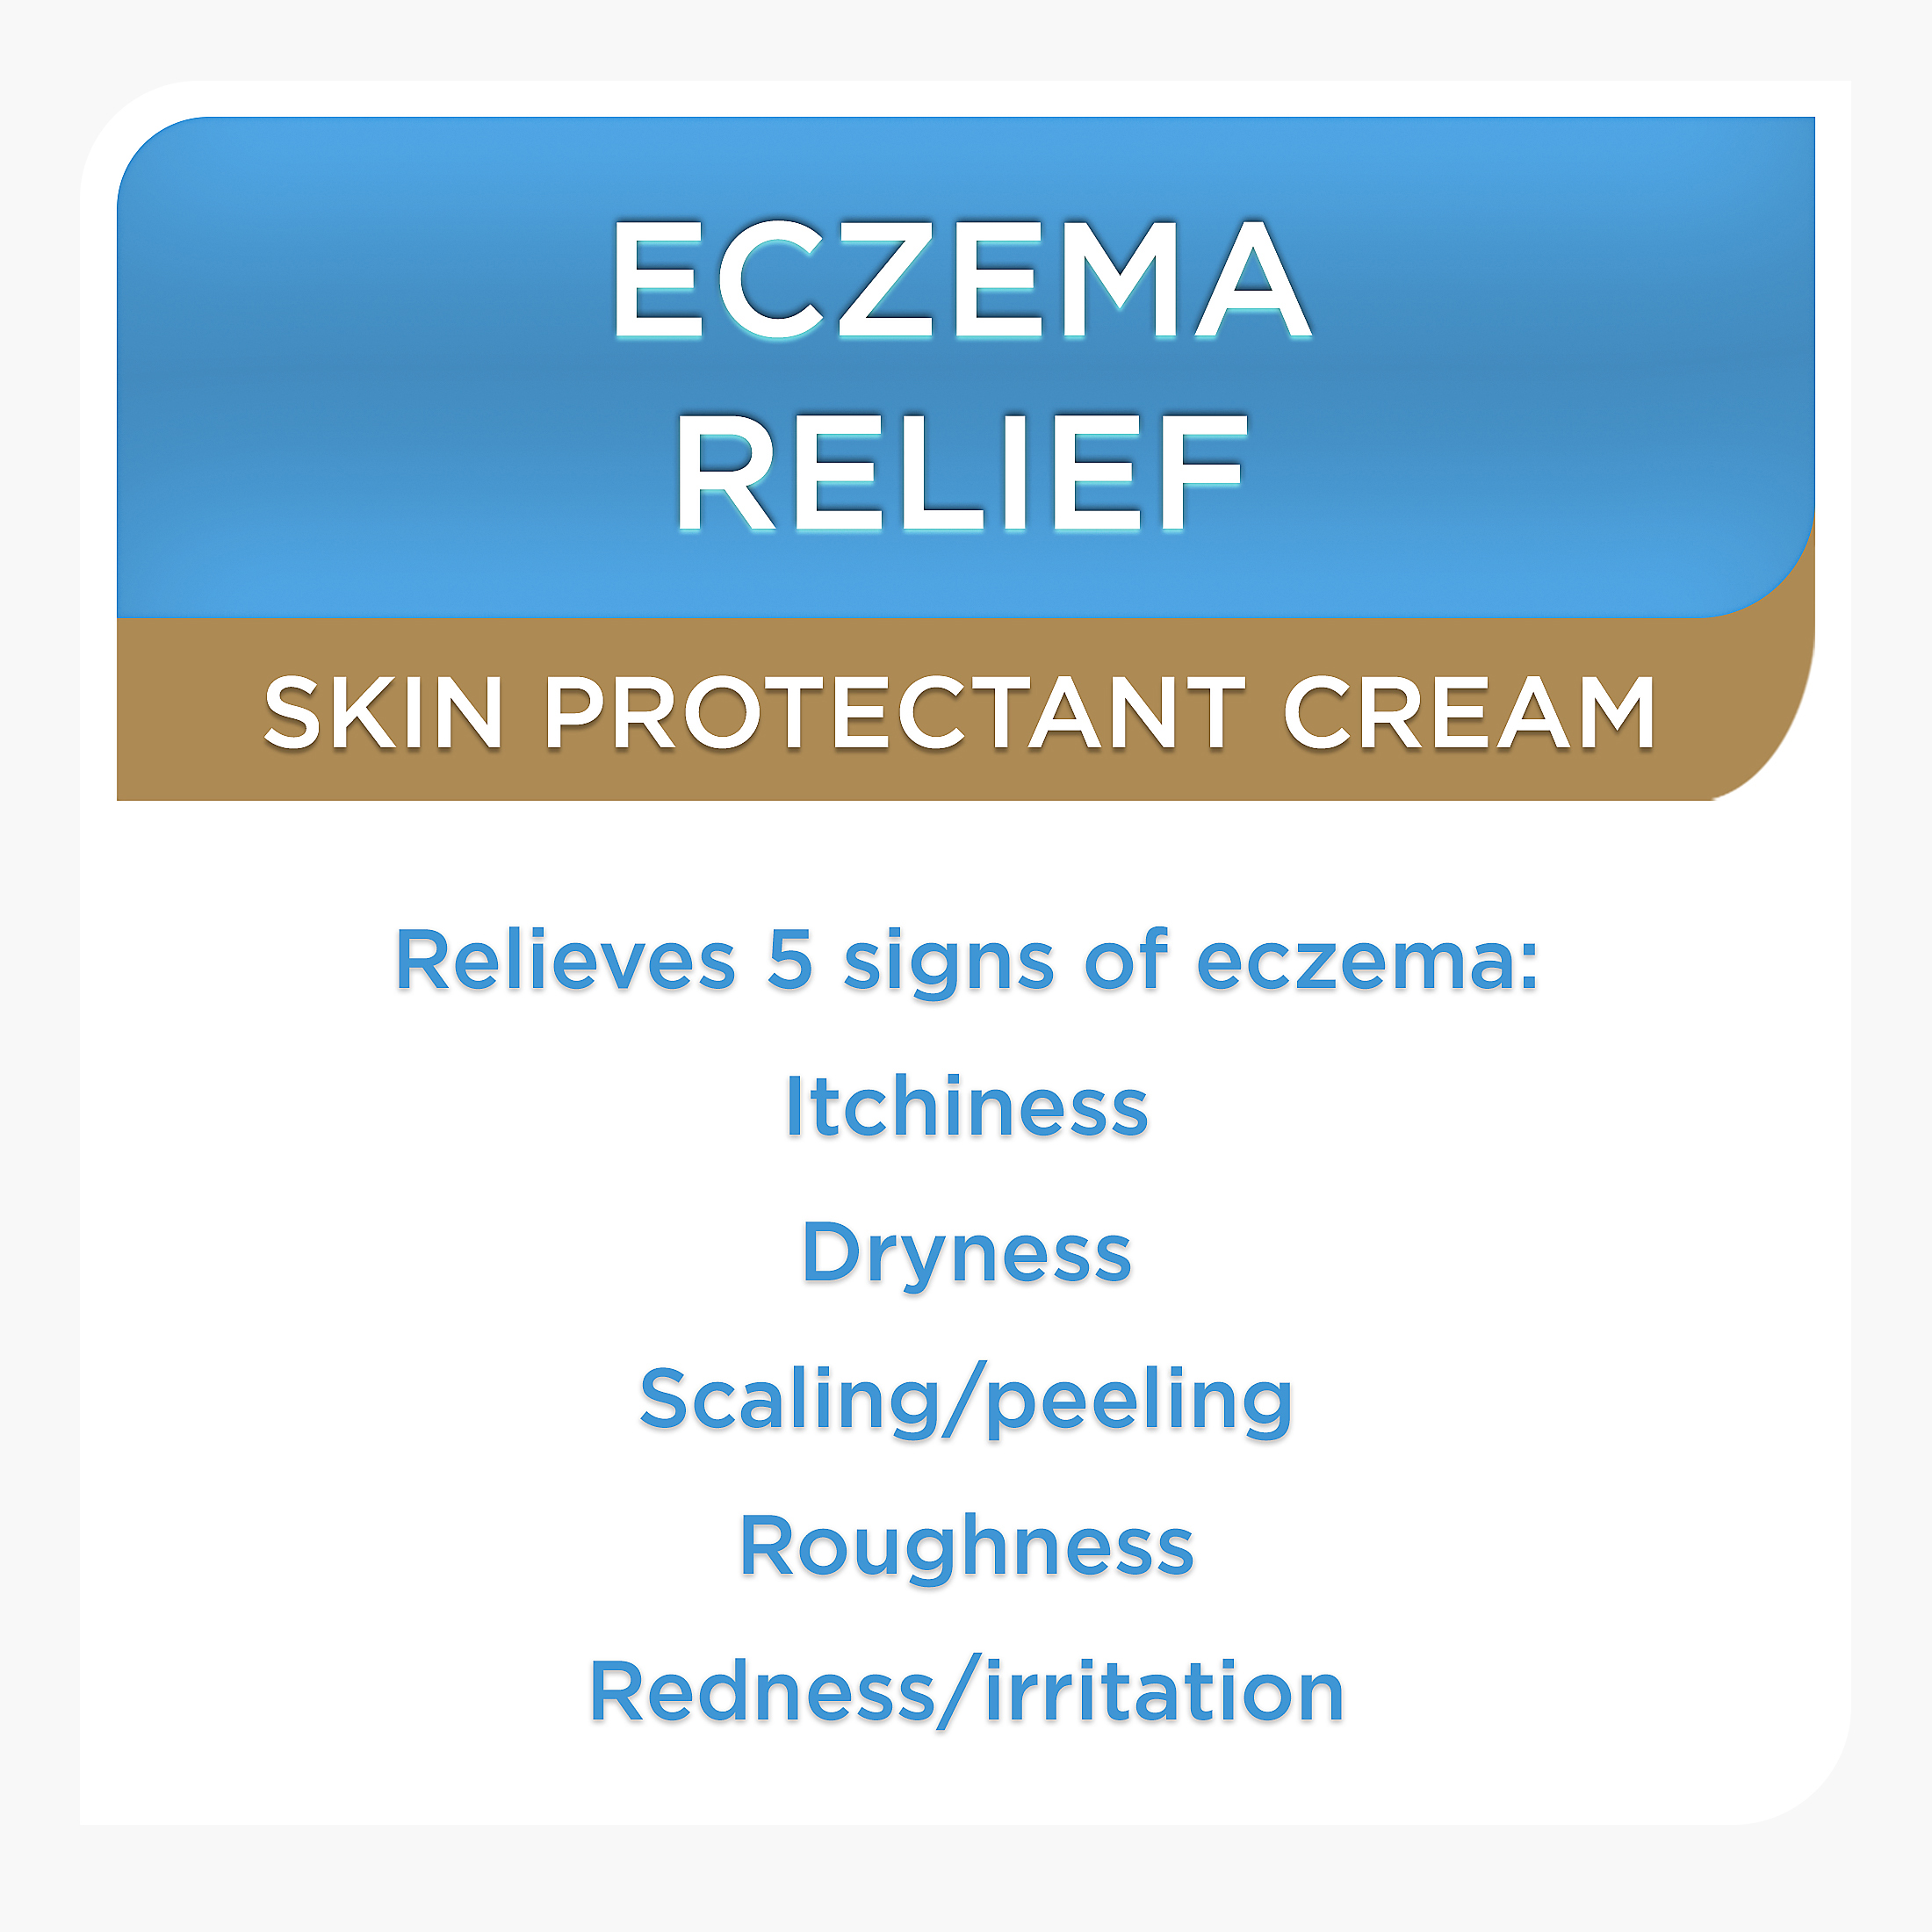 Equate Beauty Eczema Relief Skin Protectant Cream, 8 Oz. - image 4 of 9